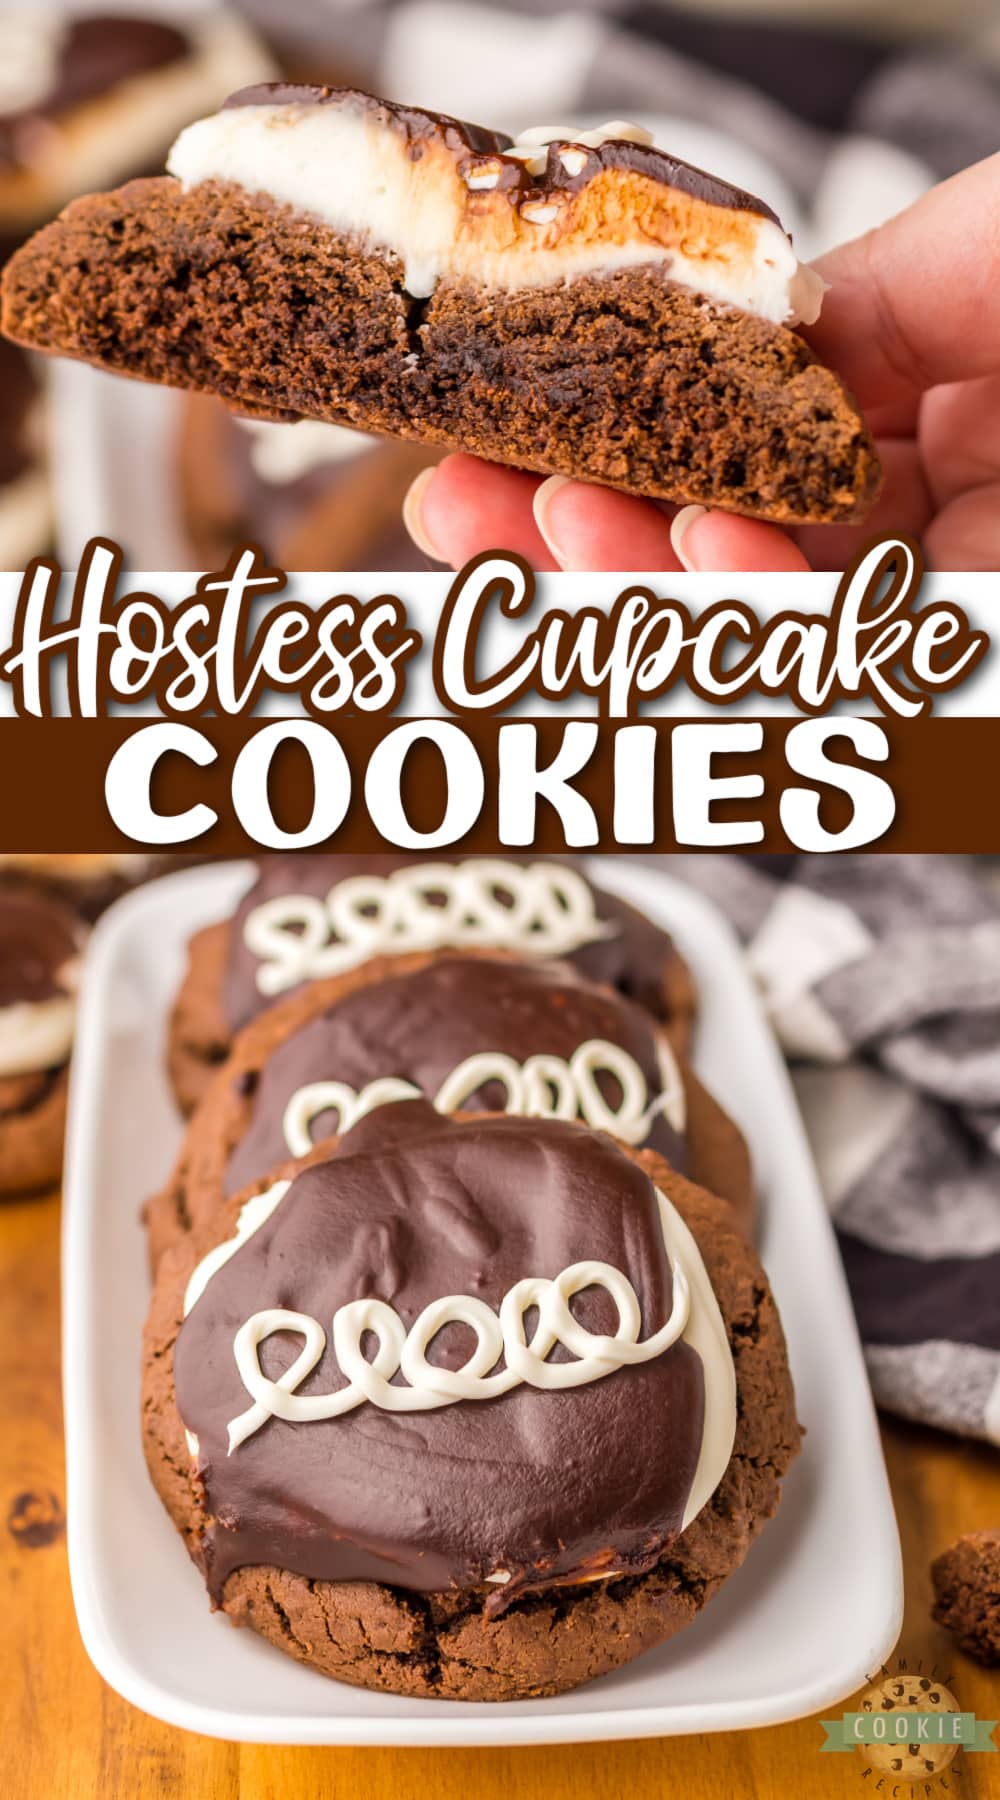 Hostess Cupcake Cookies are a fun twist on the classic chocolate cupcakes with cream filling and chocolate ganache. 